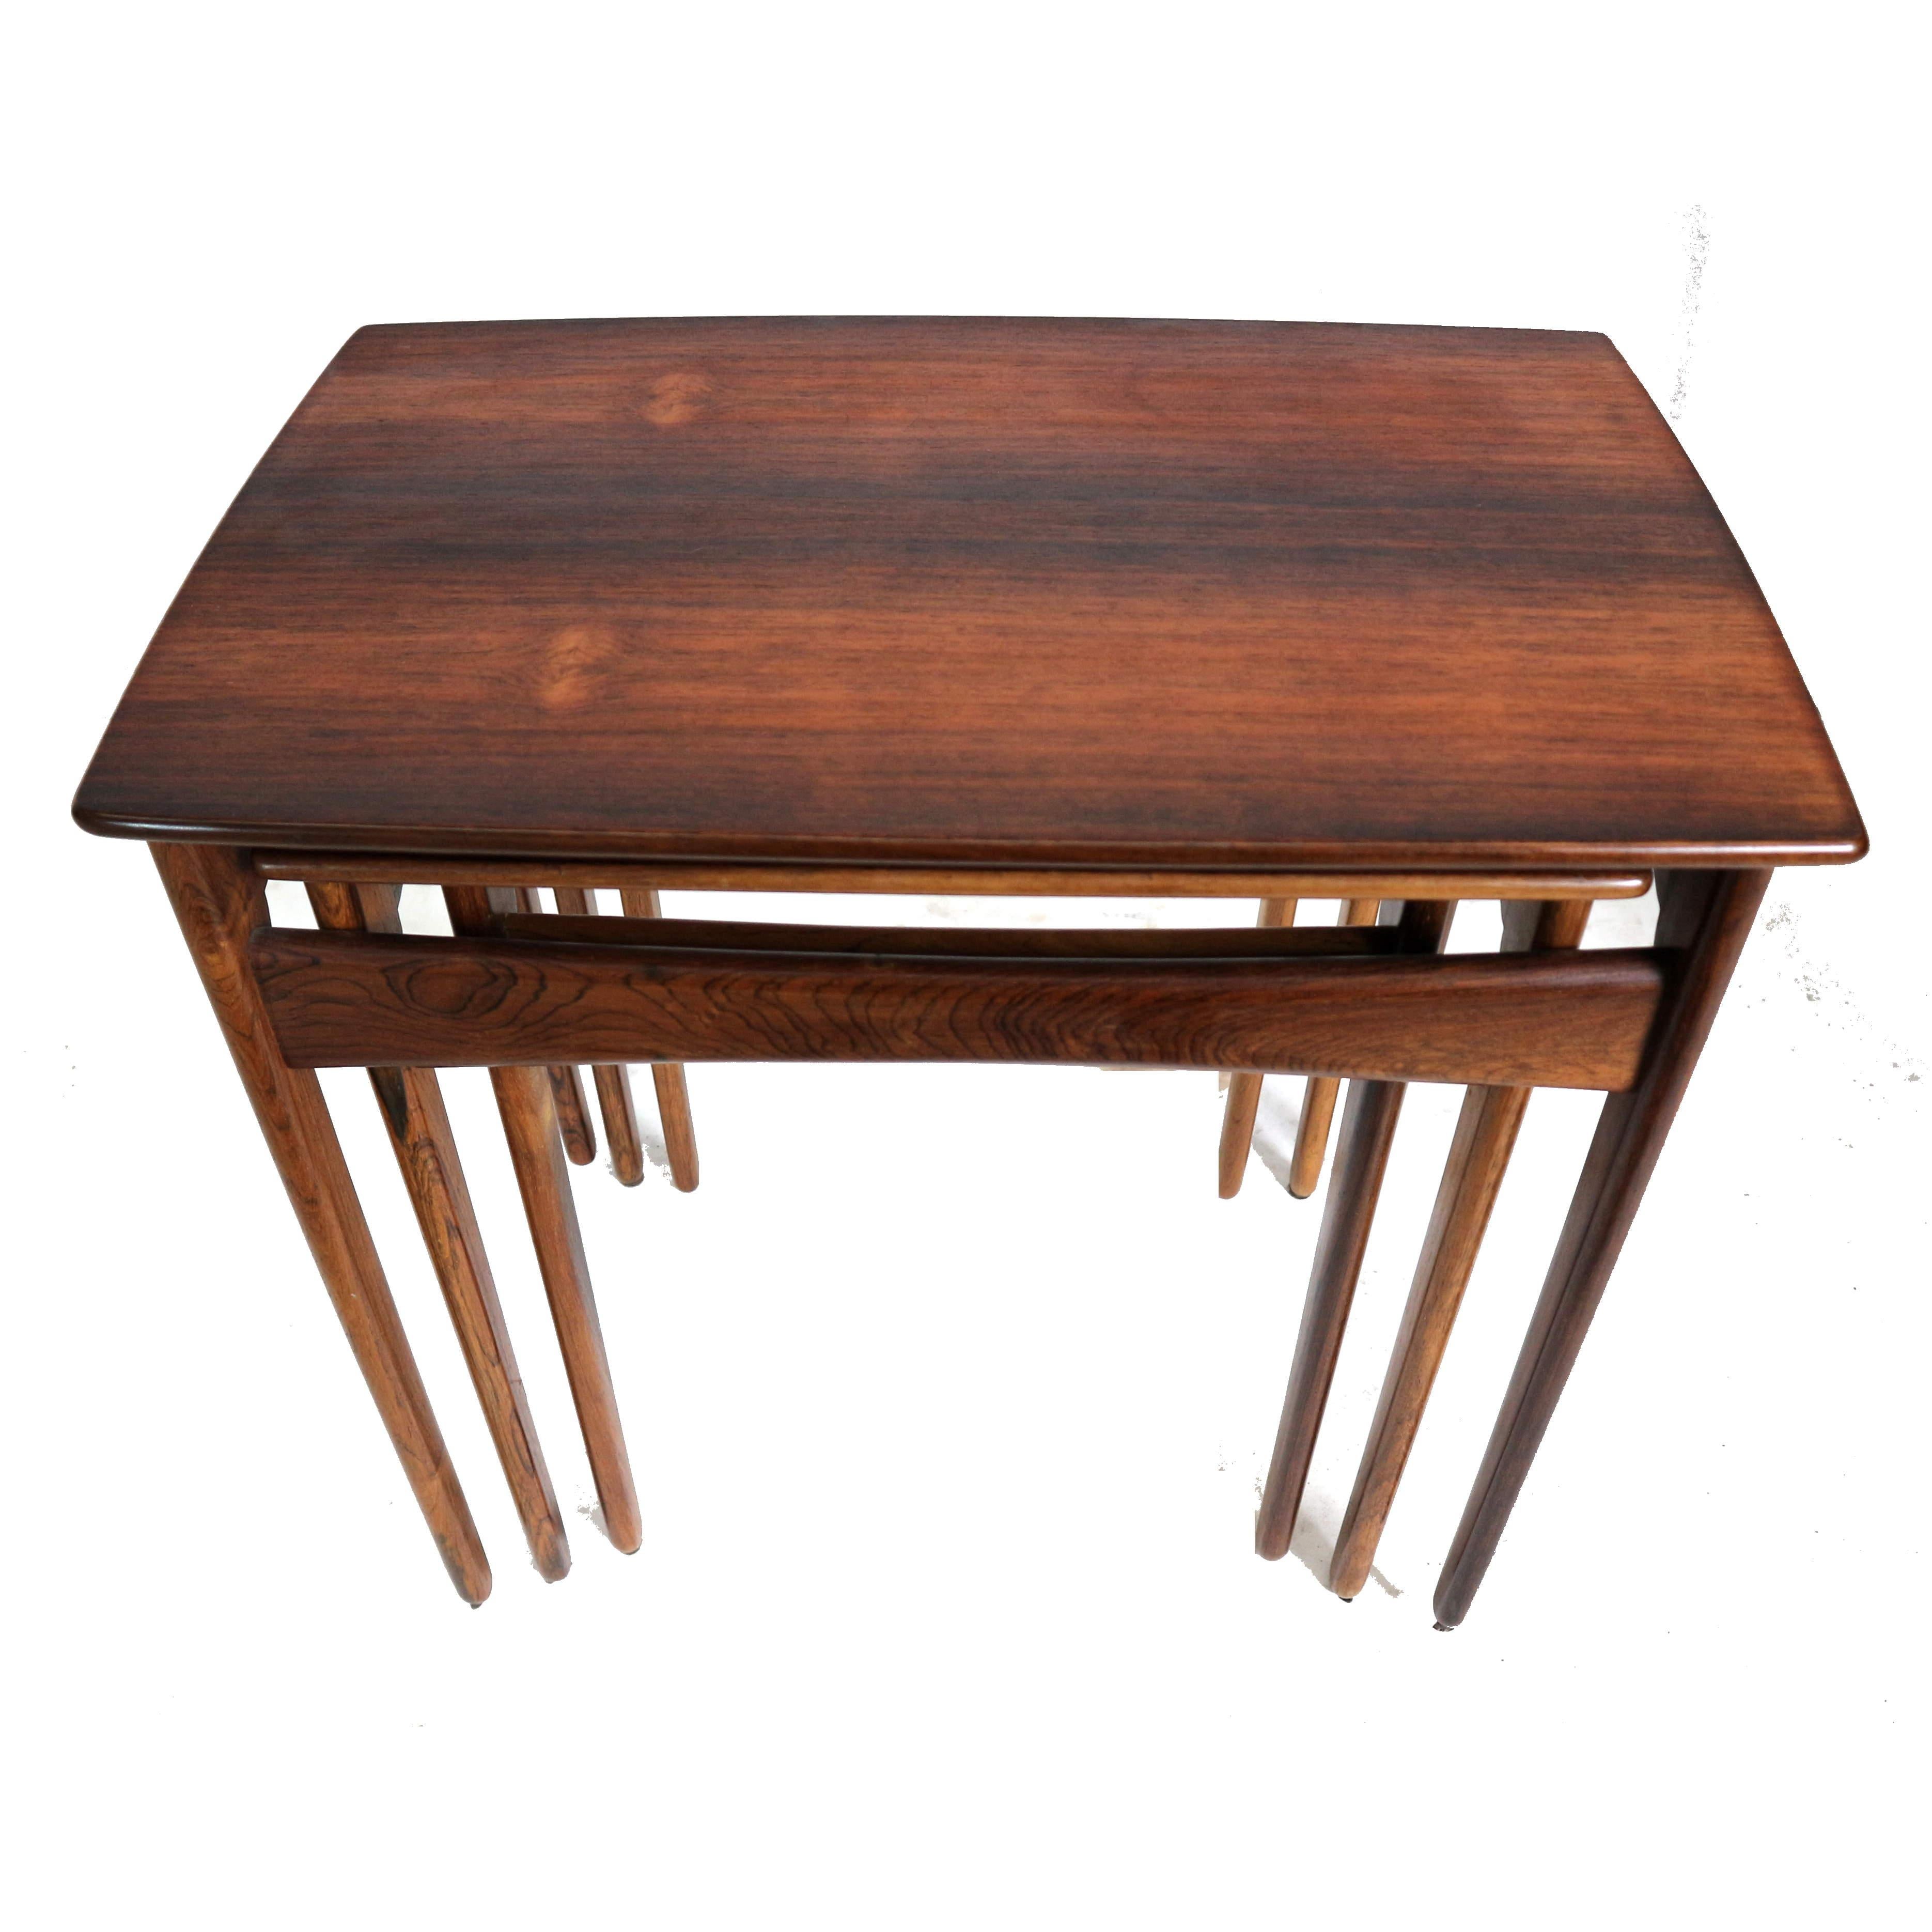 Danish vintage rosewood nesting tables / set of 3 side tables made in the 60s.

Dimensions:
Table 1: W 55 cm H 51.6 cm D 35.8 cm
Table 2: W 46 cm H 50.3 cm D 33.6 cm
Table 3: W 38.3 cm H 48.4 cm D 30.1 cm

The tables have minor traces of use. 
